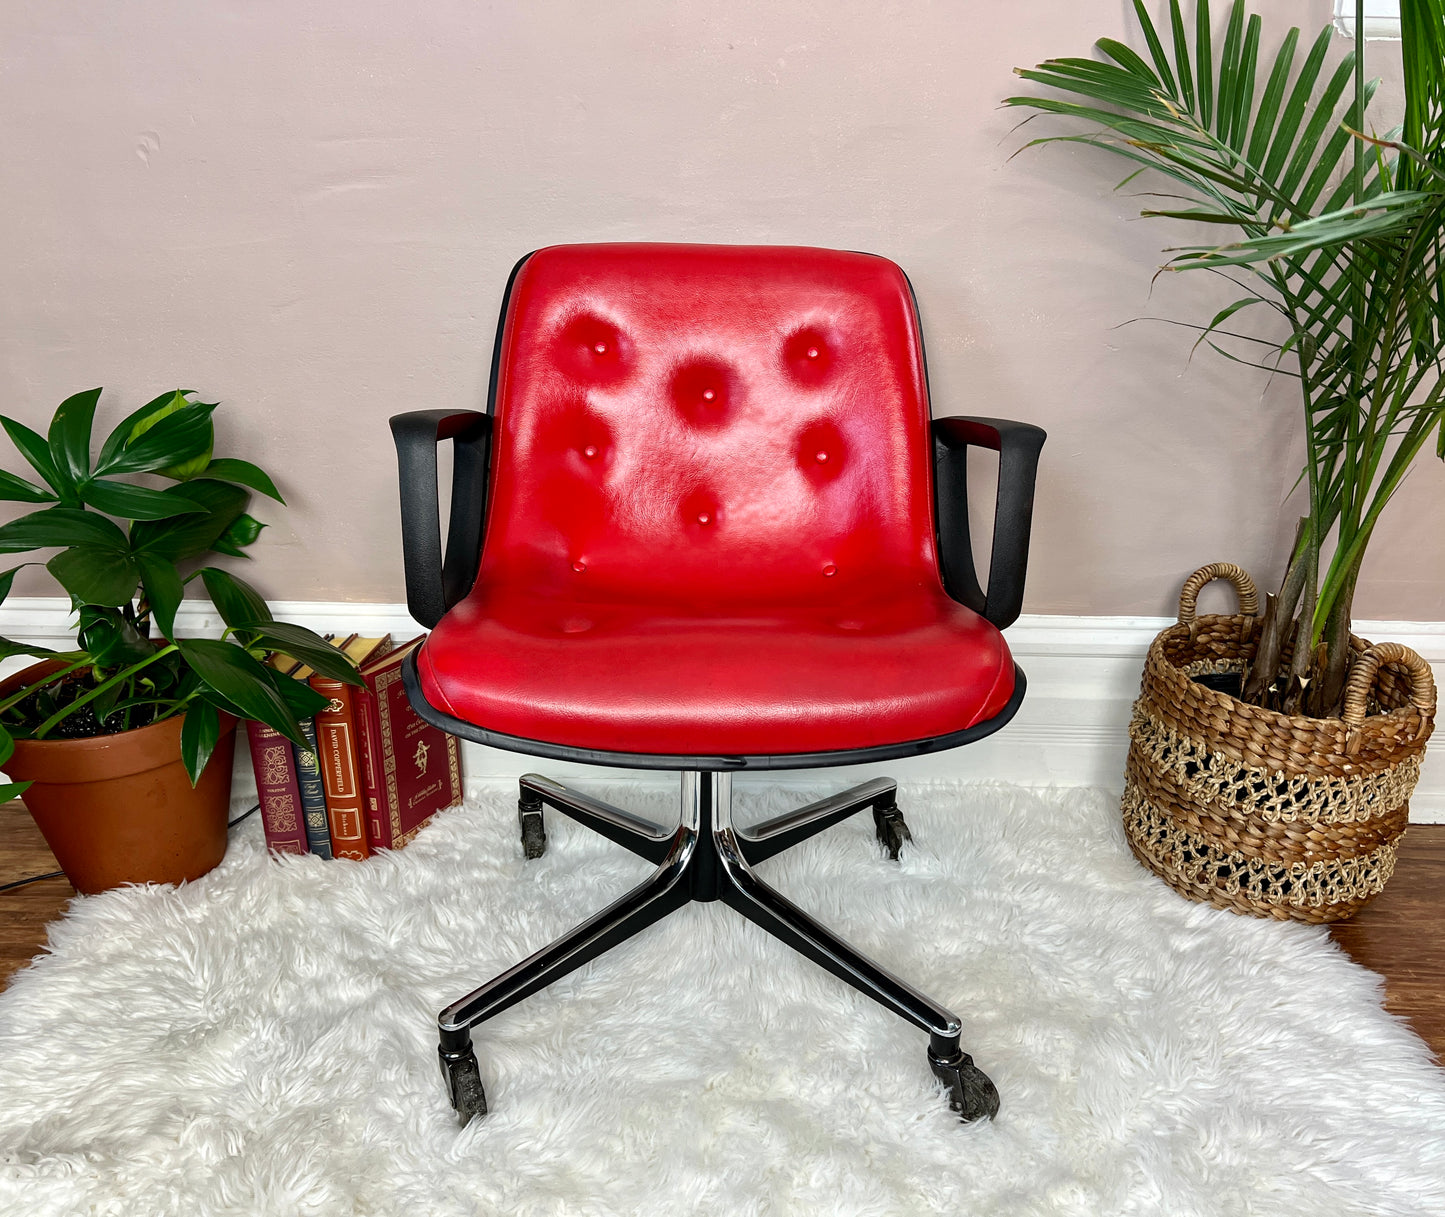 The Kristof Office Chair